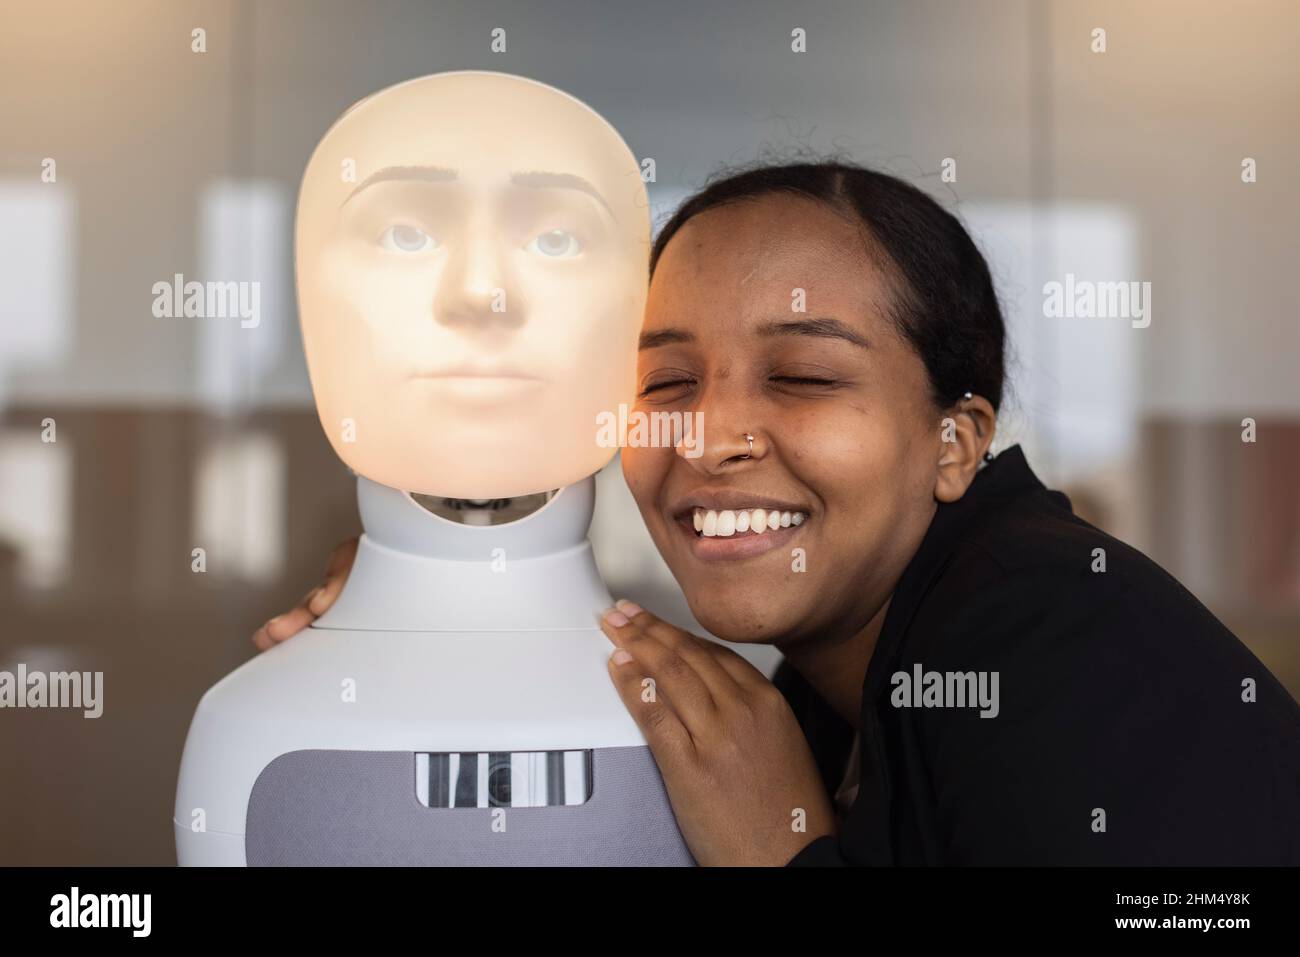 Smiling young woman with robot voice assistant Stock Photo